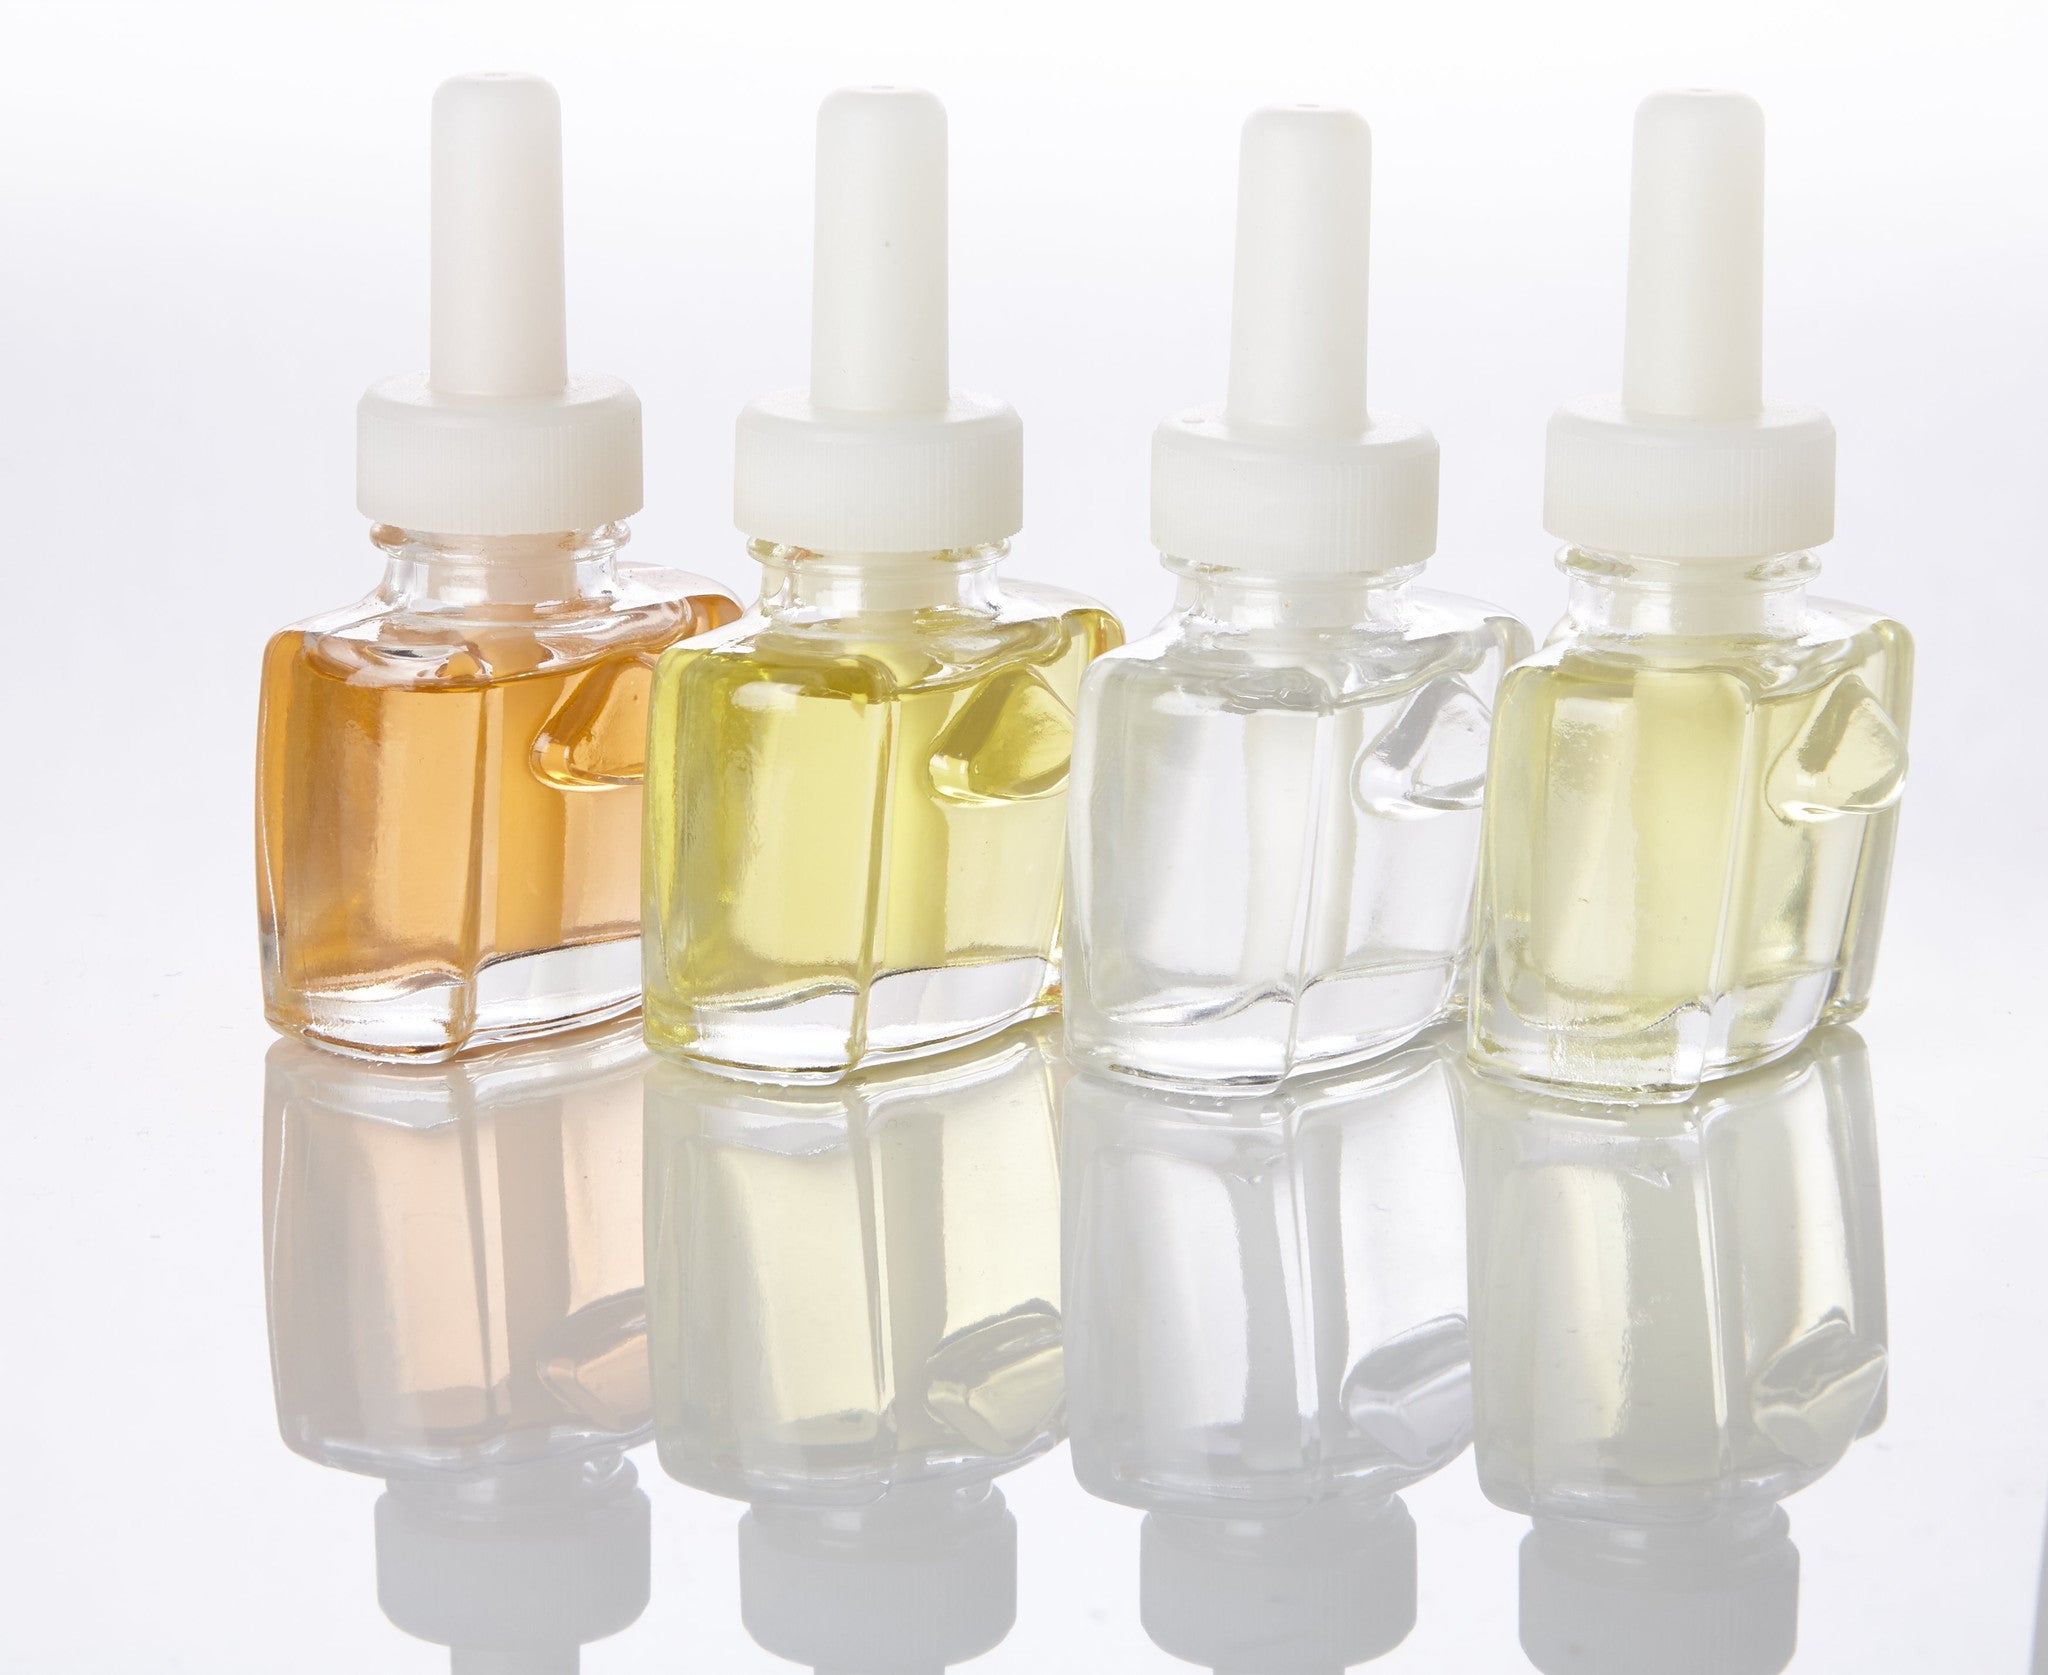 Olfactory Mapping Plugin Scented Oils